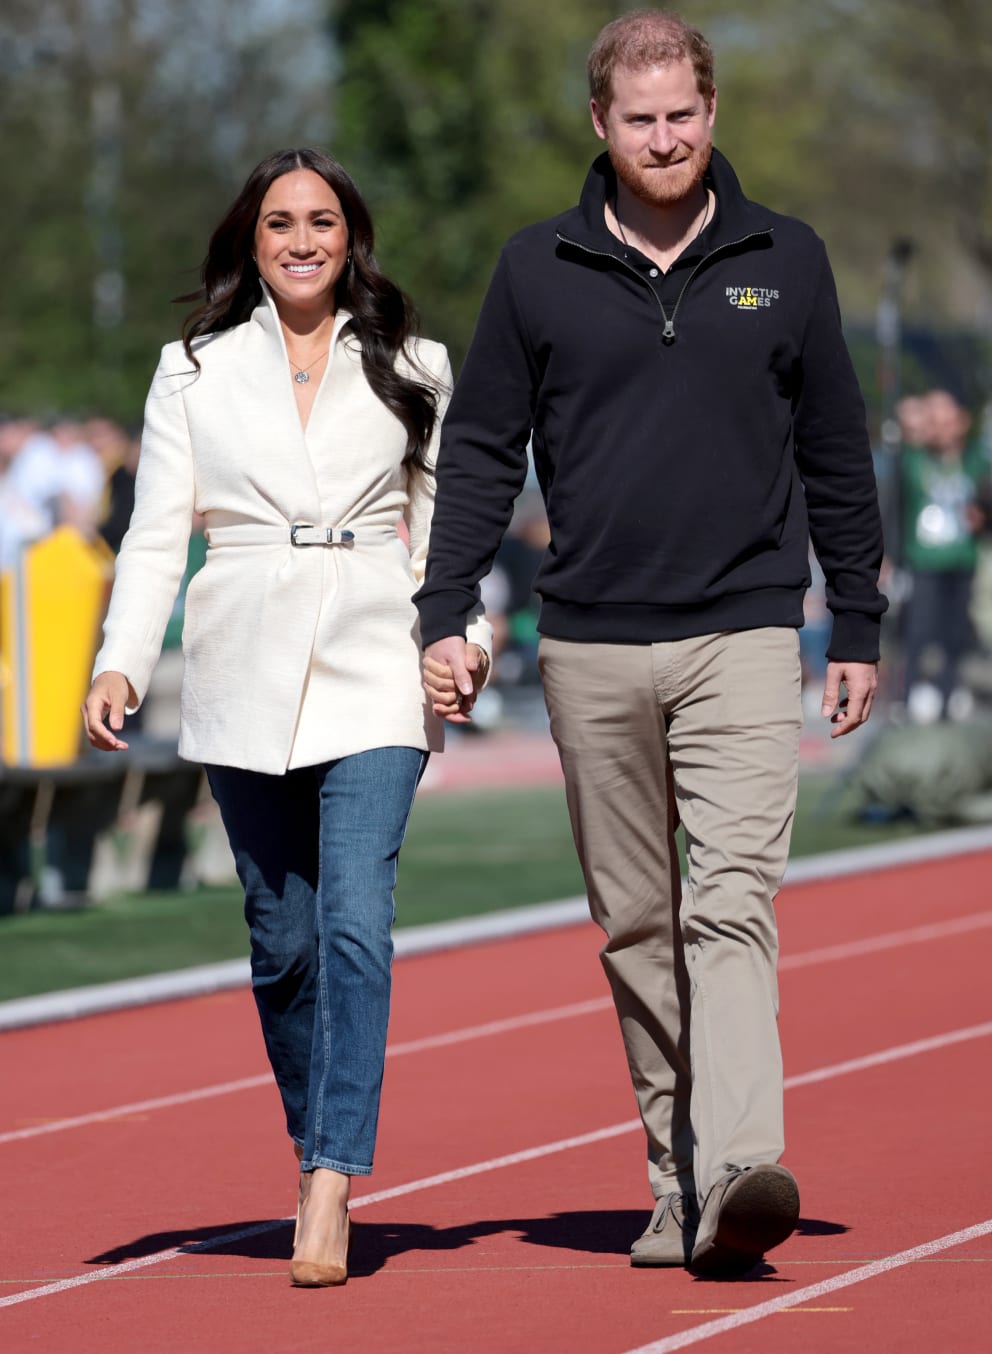 Meghan and Harry at the Invictus Games in The Hague, Netherlands in April 2022.  There too, they had no claim to the rights of their nobility, they were not received by the Dutch royal family.